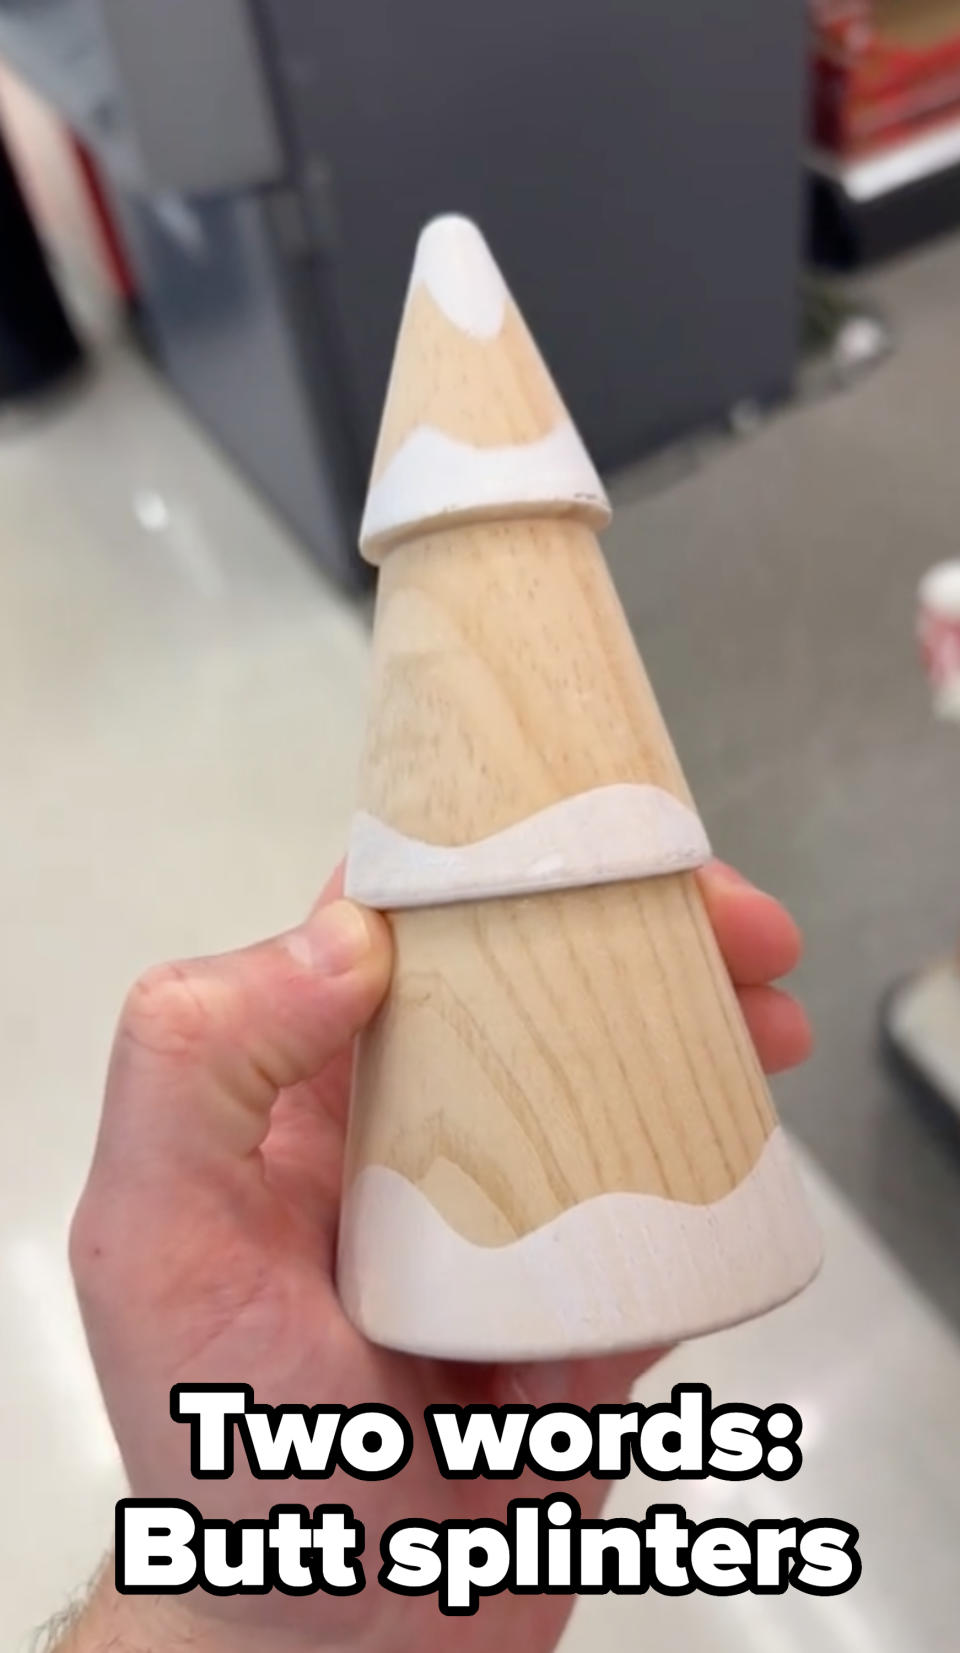 A wooden tree ornament with caption "Two words: Butt splinters"